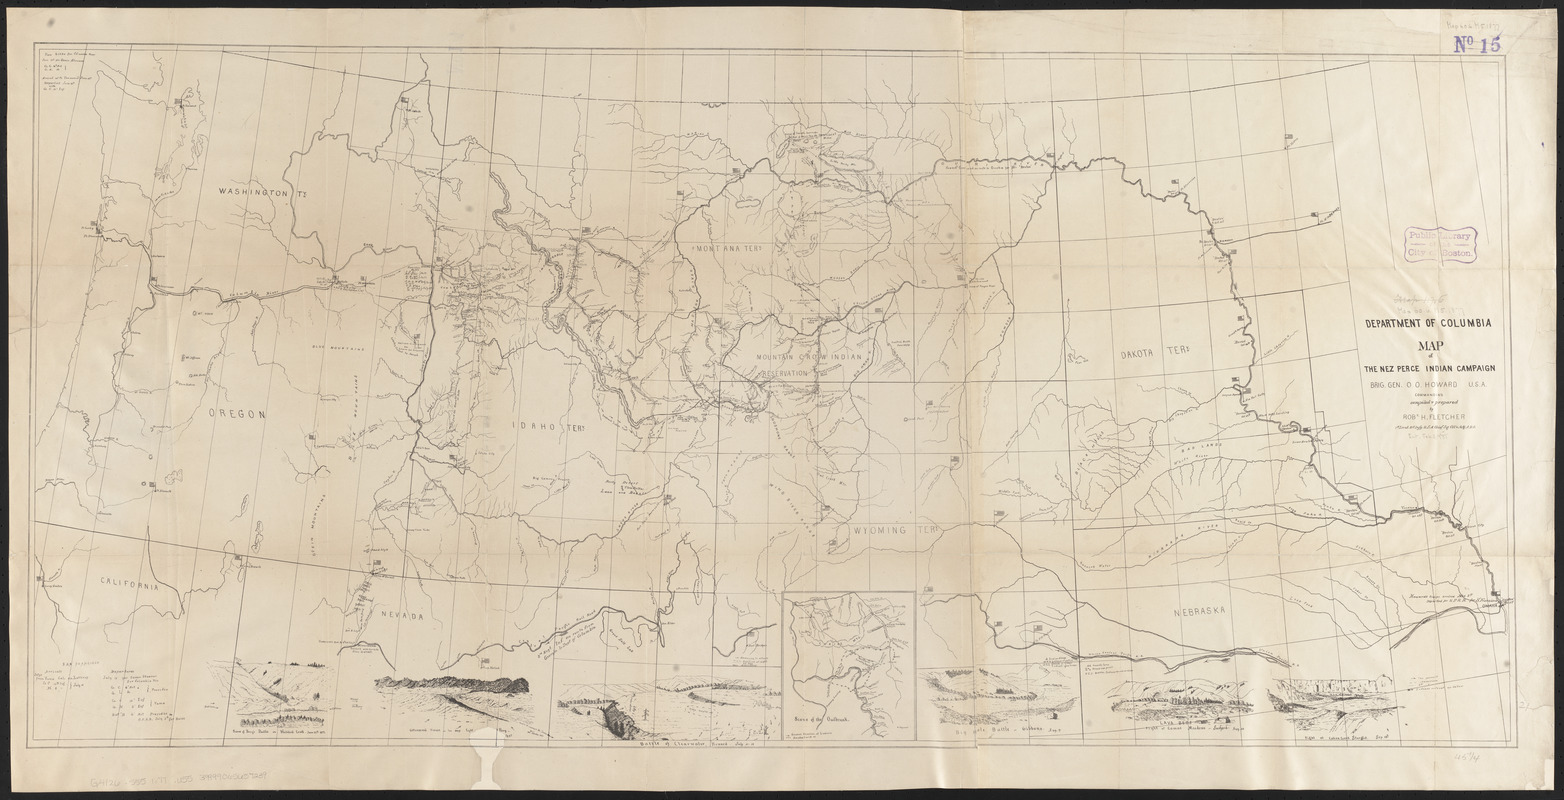 Map of the Nez Perce Indian campaign Brig. Gen. O. O. Howard commanding